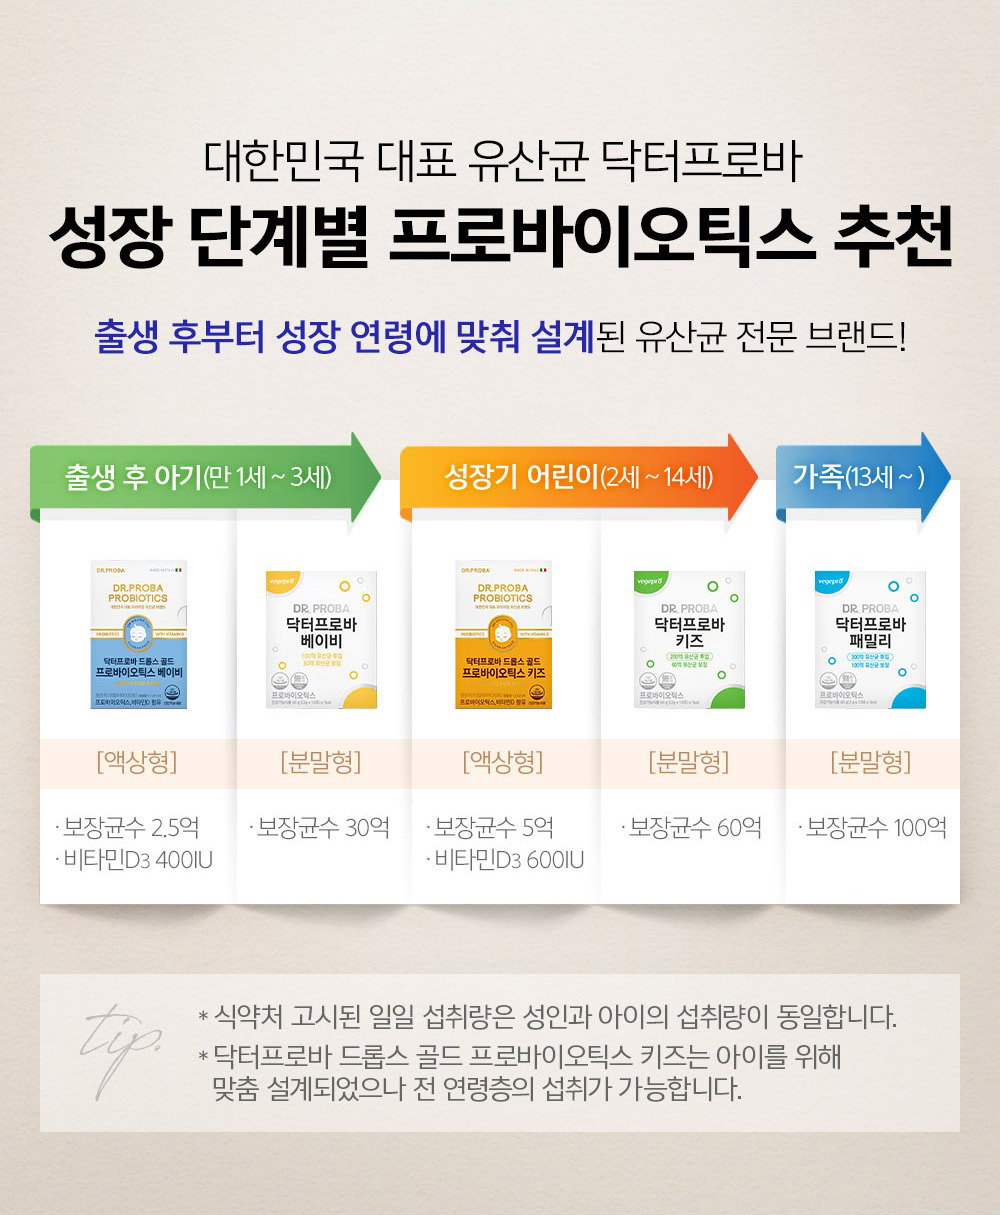 Korea's representative lactic acid bacteria, Dr. Proba, recommends probiotics at each stage of growth. A specialized brand of lactic acid bacteria designed according to growth age from birth! [Liquid type] o 250 million guaranteed bacteria o Vitamin D3 400 IU [powder type] o guaranteed bacterial count 3 billion [liquid type] o guaranteed bacterial count 500 million o Vitamin D3 600IU [powder type] 6 billion guaranteed bacteria [powder type] o 10 billion guaranteed bacteria *The daily intake announced by the Ministry of Food and Drug Safety is the same for adults and children. *Dr. Prova Drops Gold Probiotics Baby is custom designed for babies, but can be consumed by all age groups.